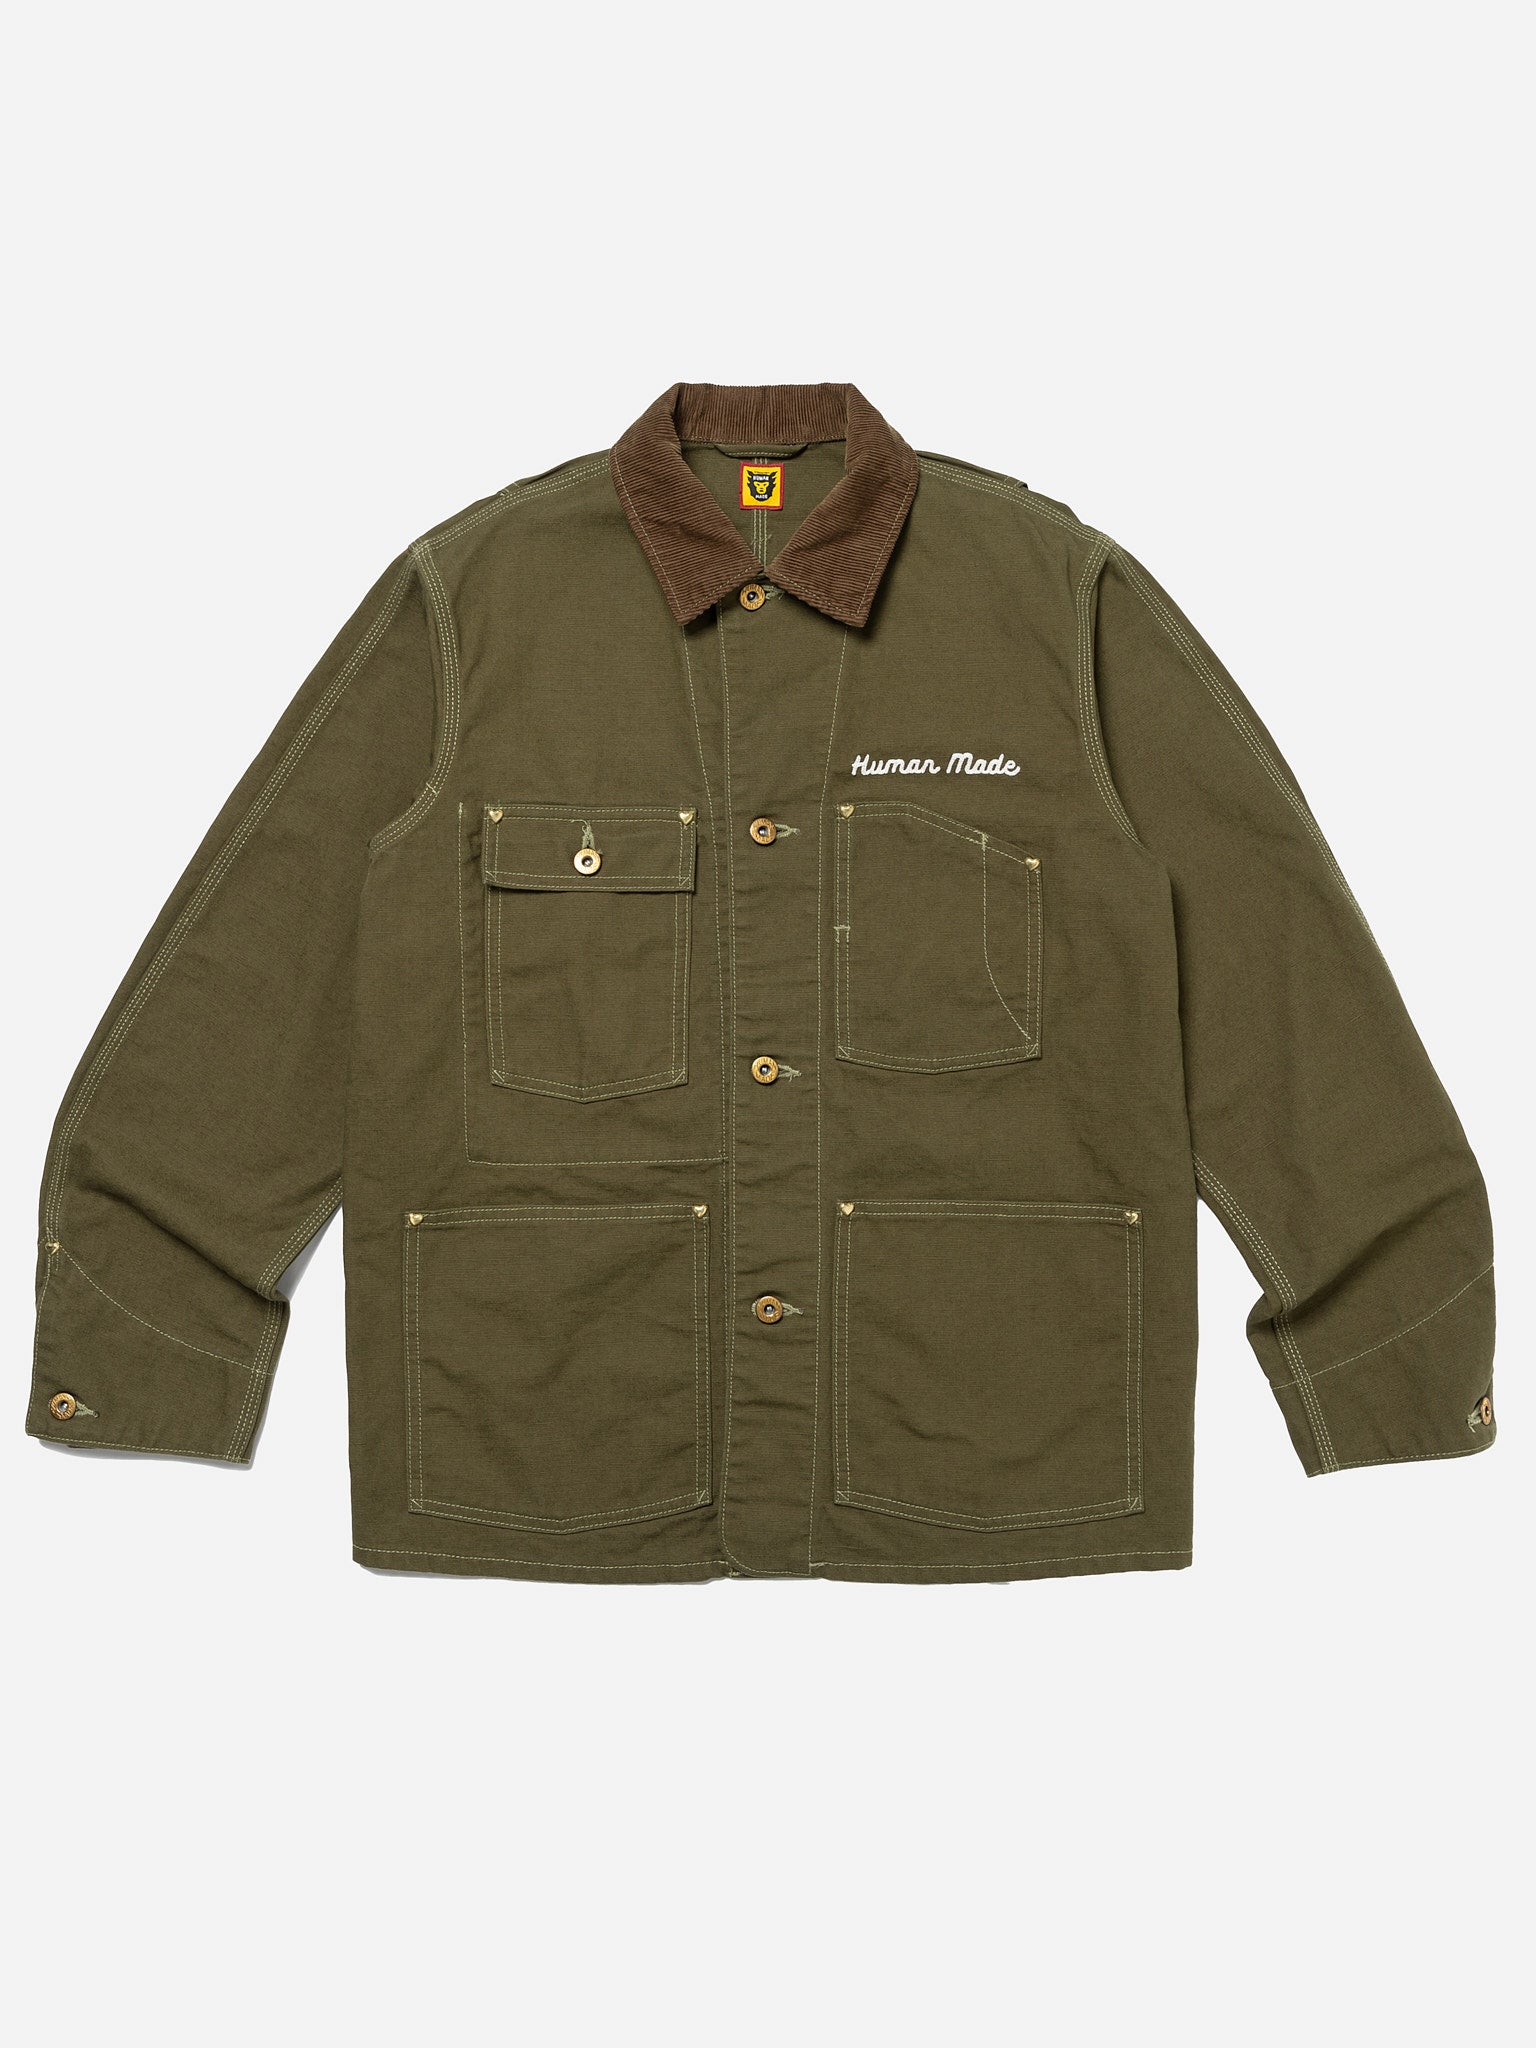 Human Made Duck Coverall Jacket – OALLERY